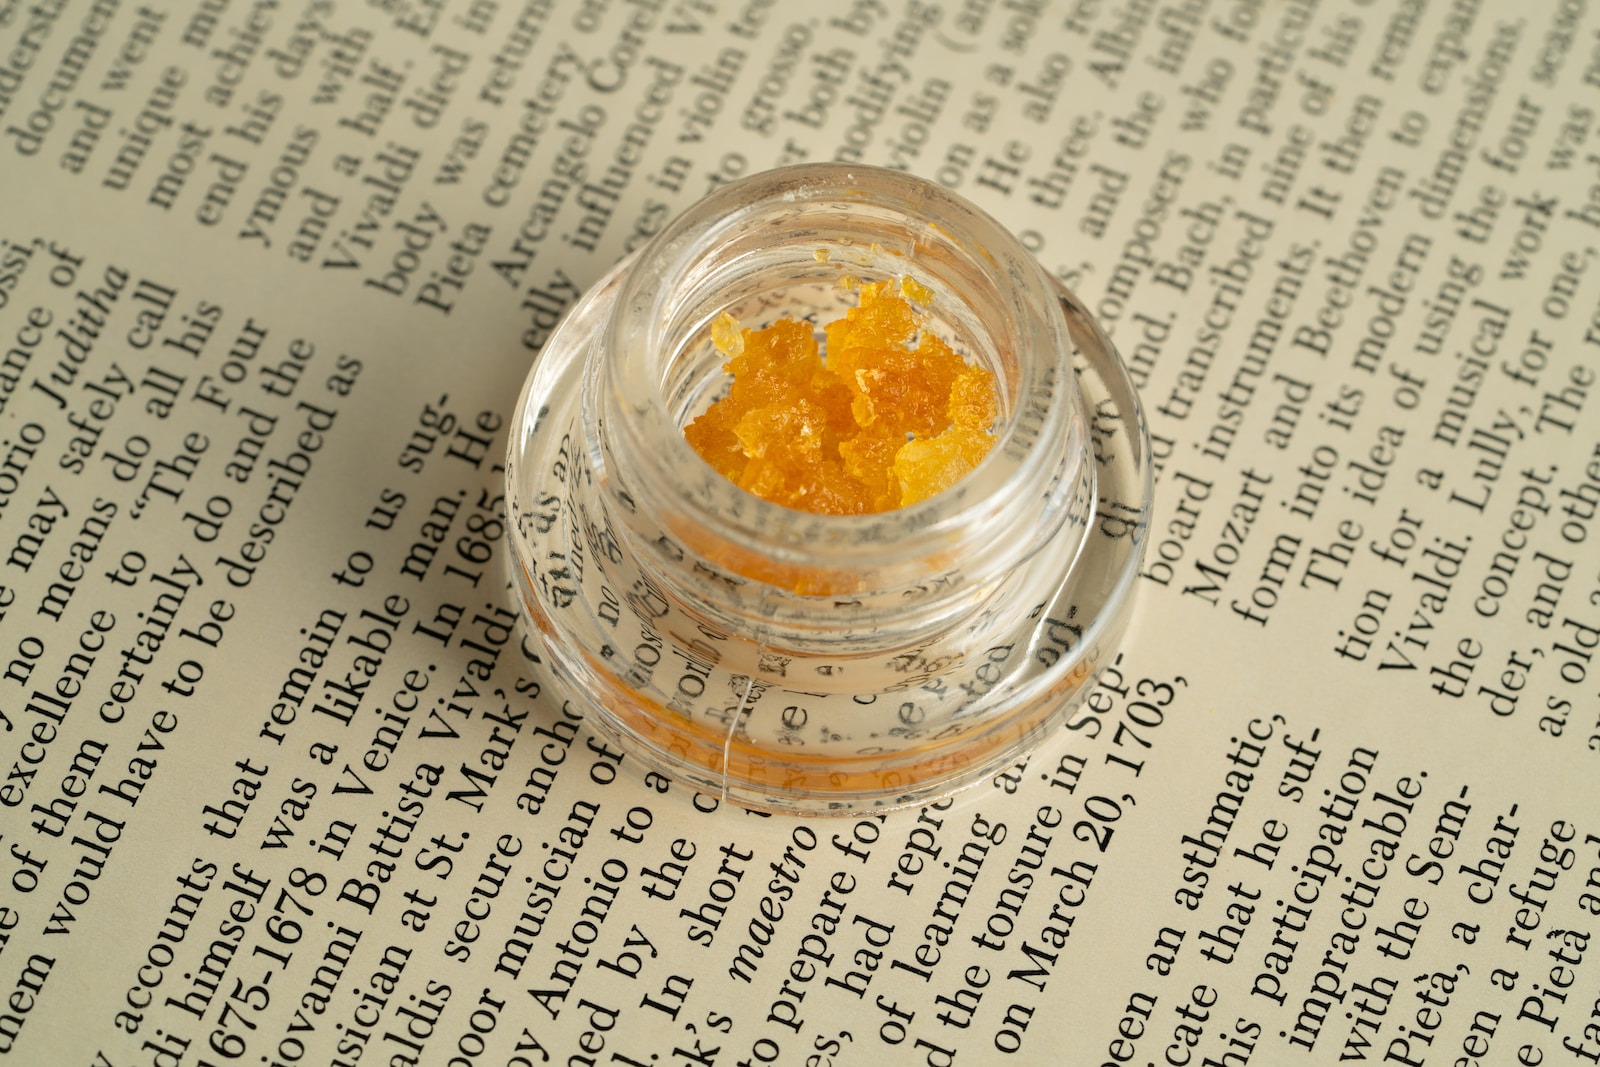 a small jar filled with yellow stuff sitting on top of a book